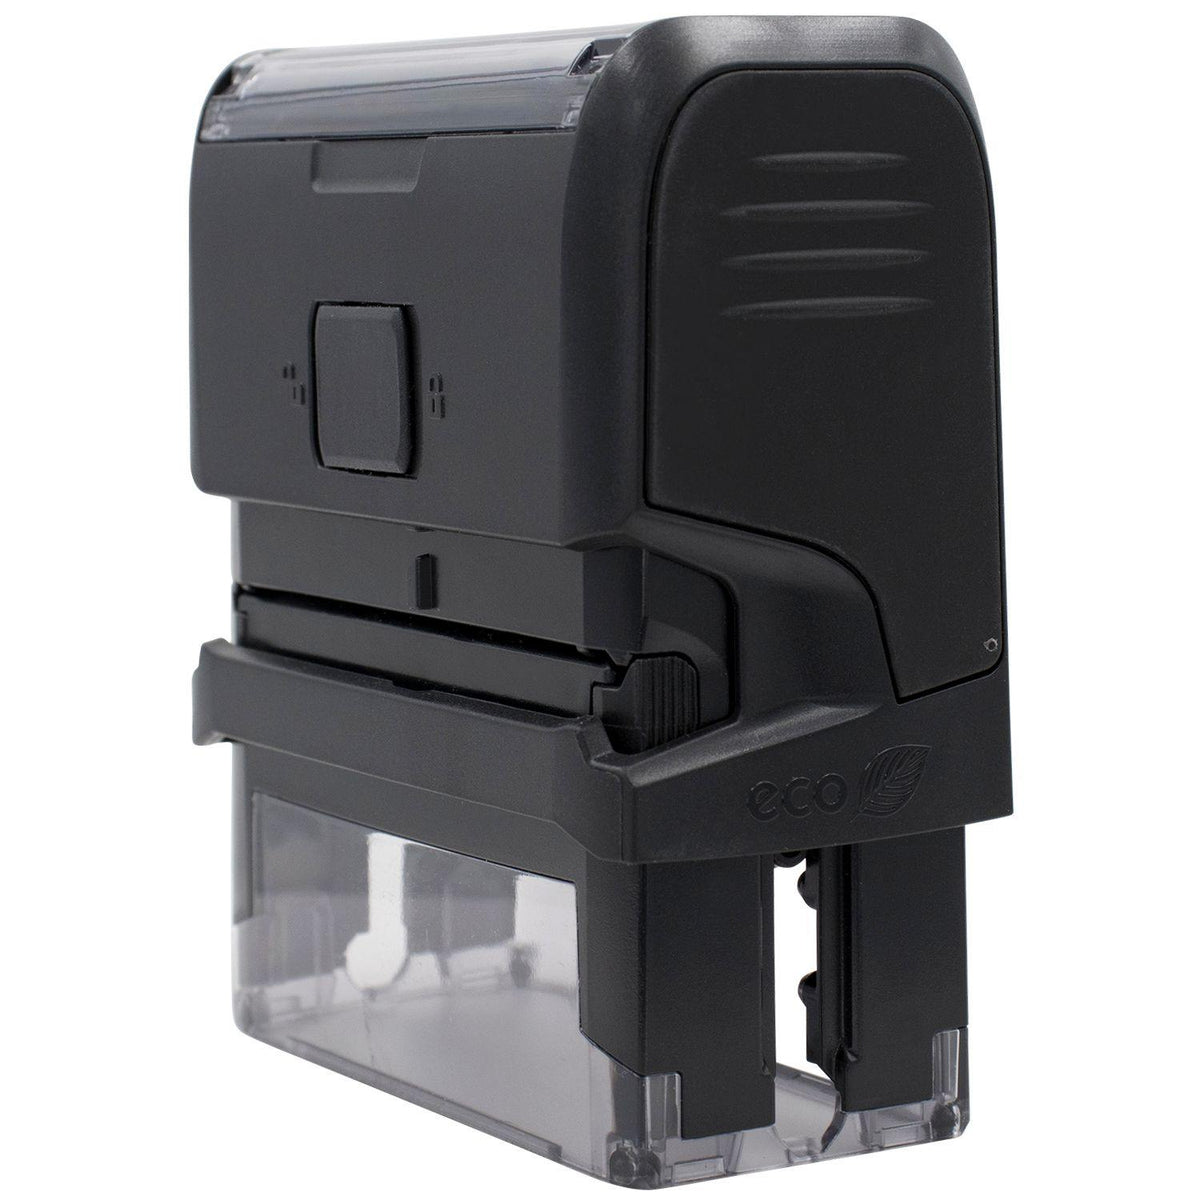 Self-Inking Faxed on Stamp - Engineer Seal Stamps - Brand_Trodat, Impression Size_Small, Stamp Type_Self-Inking Stamp, Type of Use_Business, Type of Use_Office, Type of Use_Professional